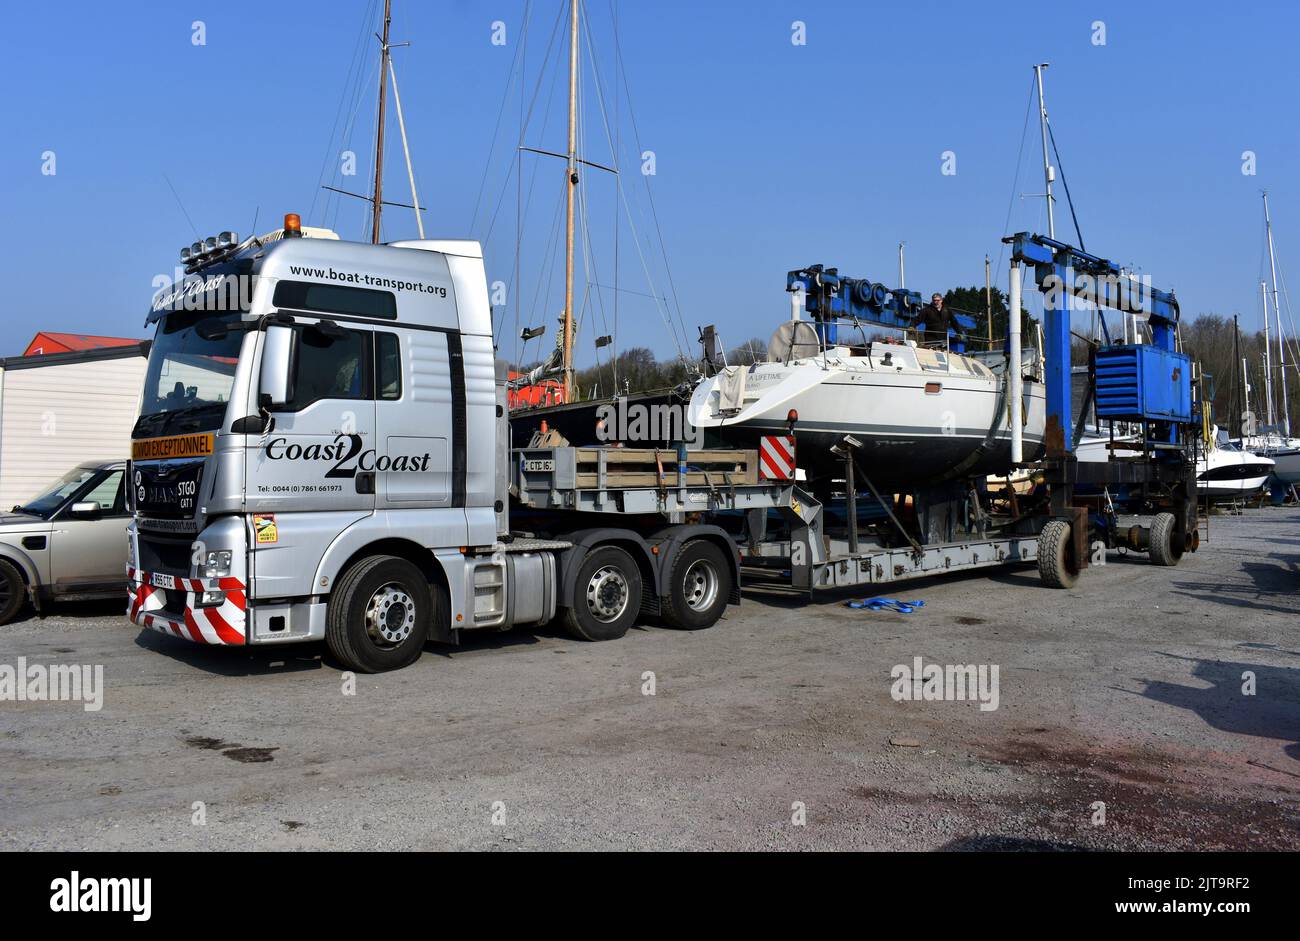 Sailing boat being transported on a truck into East Llanion boatyard, East Llanion, Pembrokeshire, Wales Stock Photo